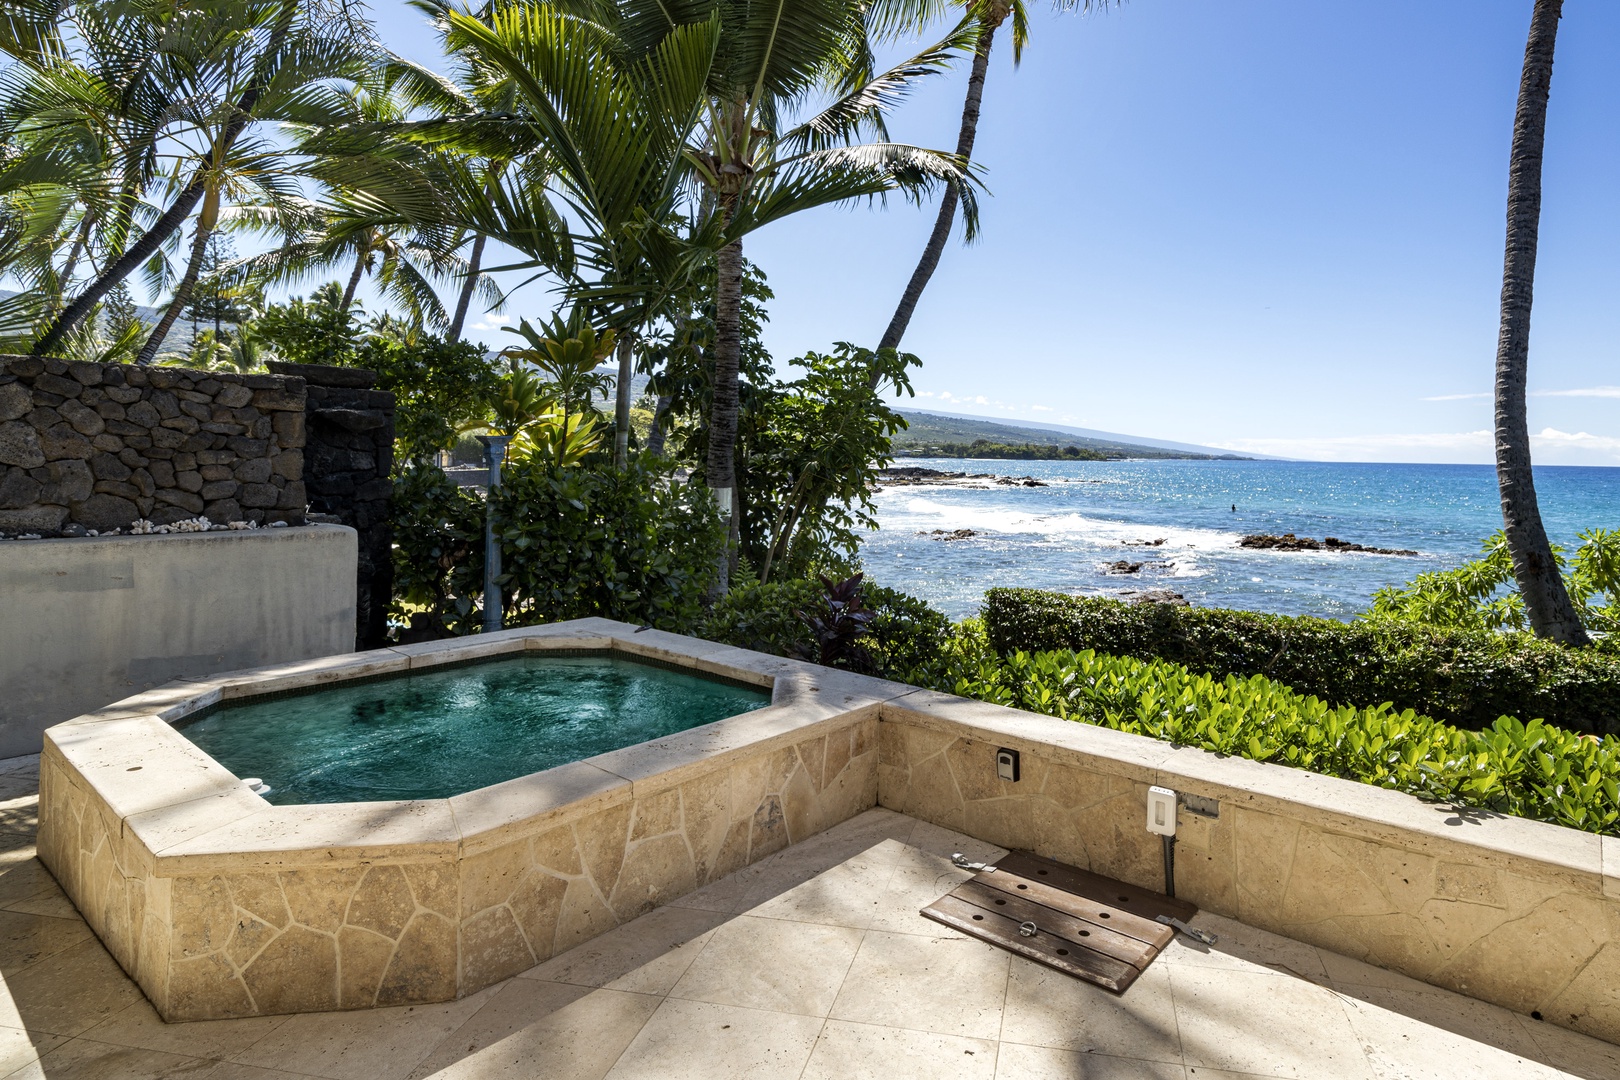 Kailua Kona Vacation Rentals, Ali'i Point #7 - Heaven on earth with this private Ocean View Hot Tub